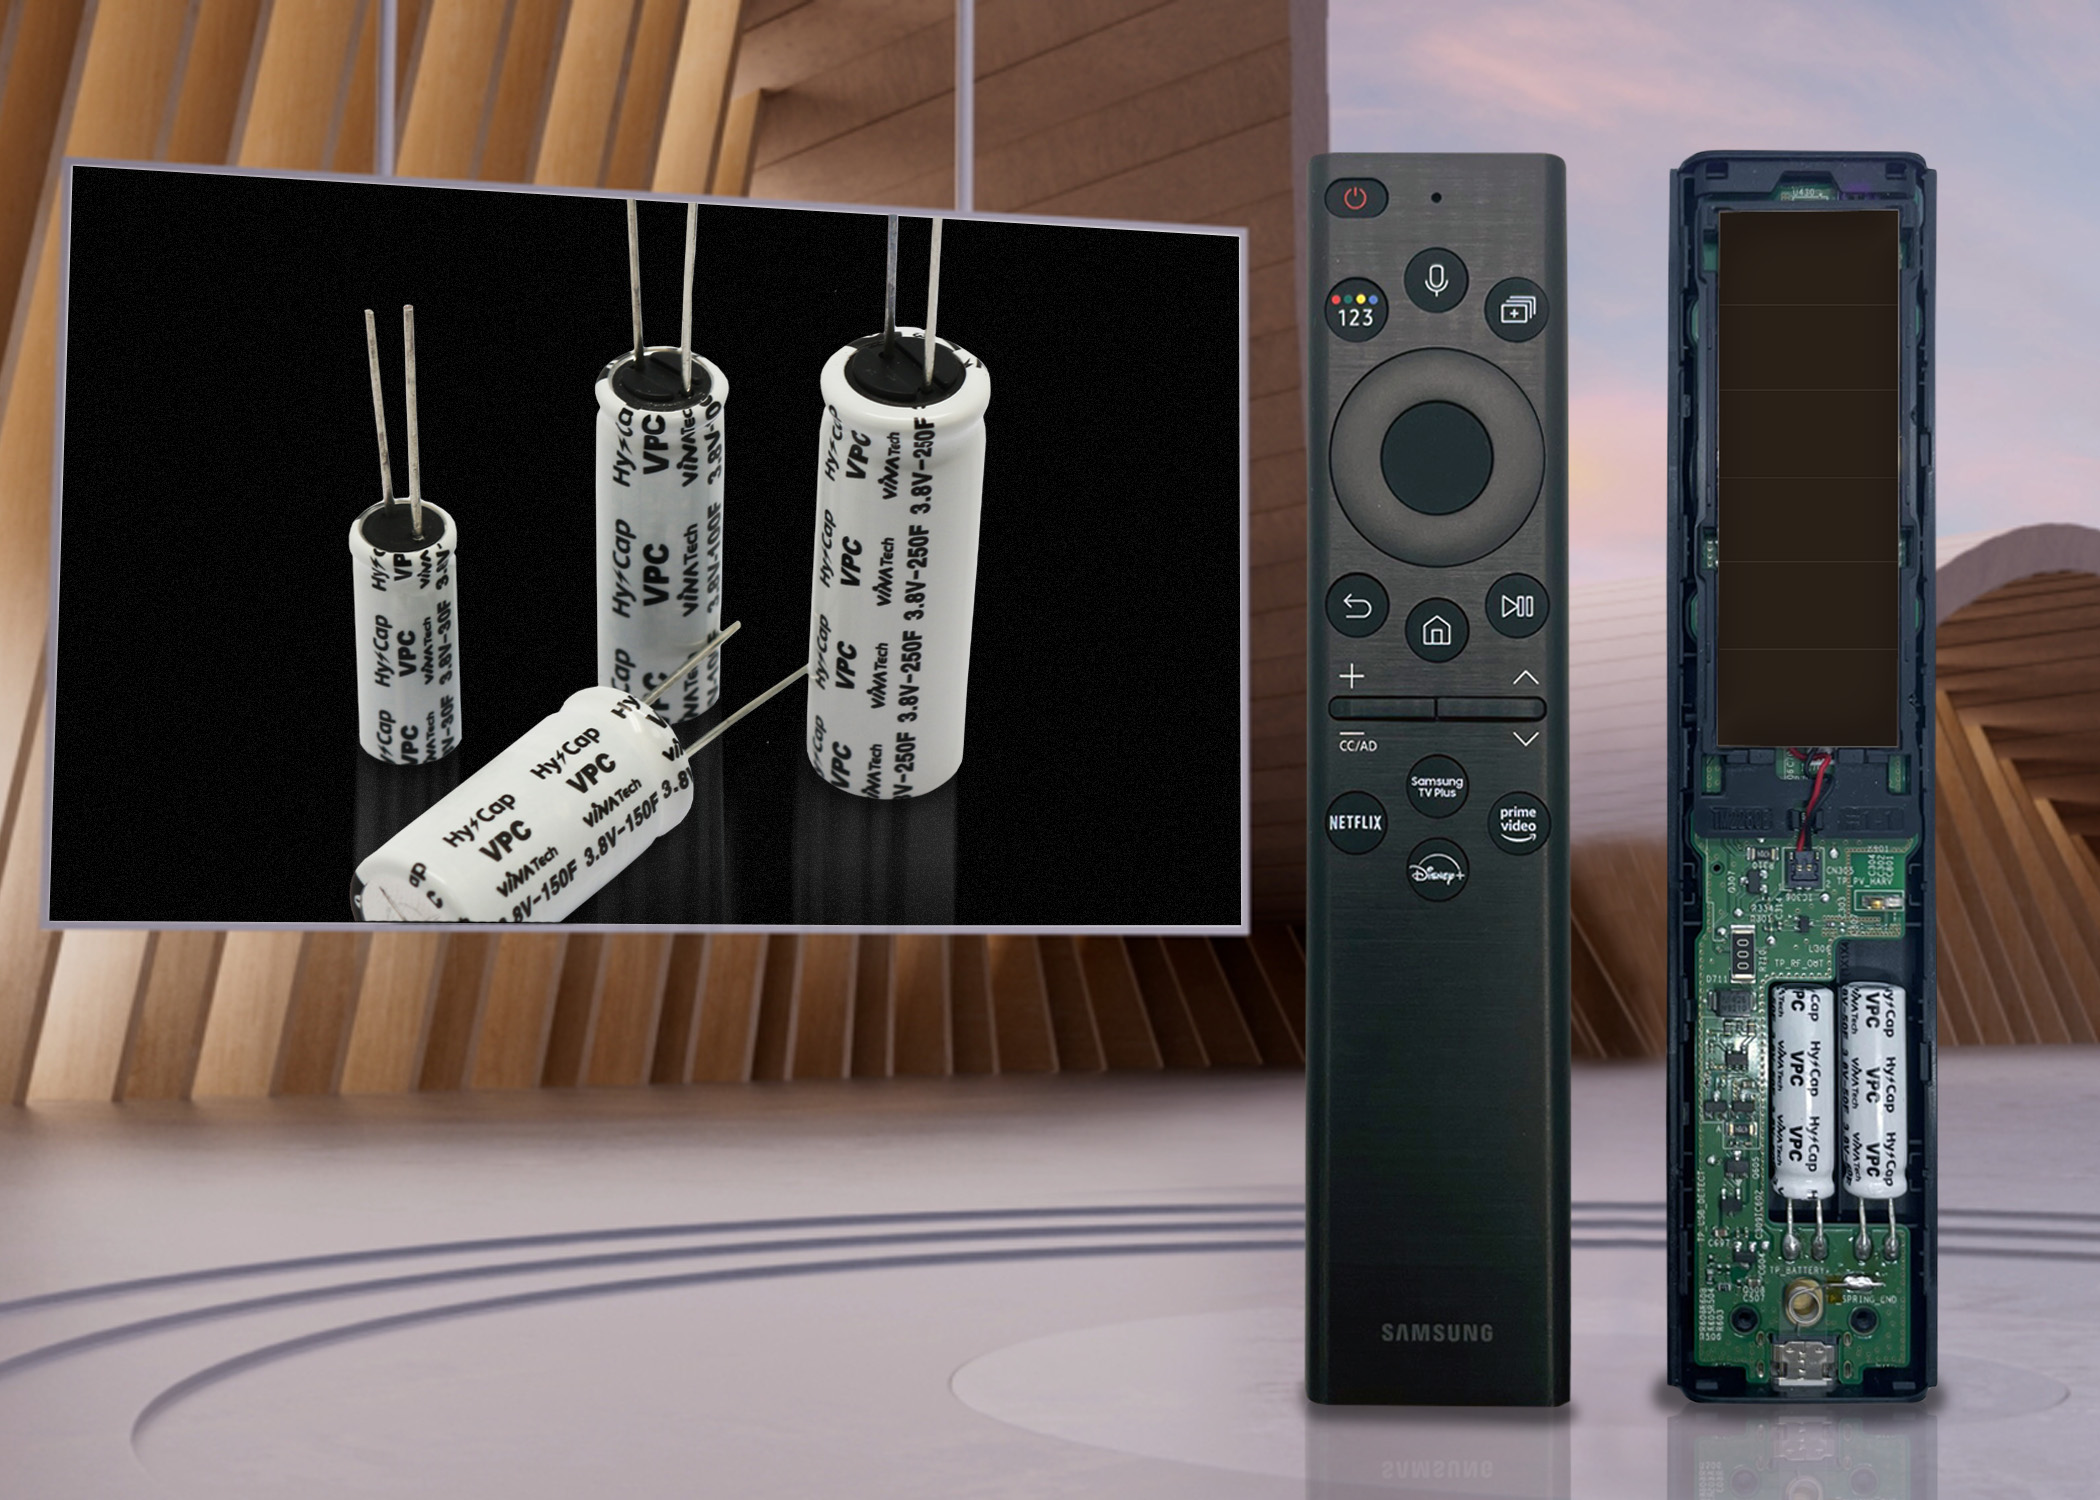 VPC Hybrid Capacitors from VINATech Replace Batteries in Eco-Friendly Samsung TV Remote